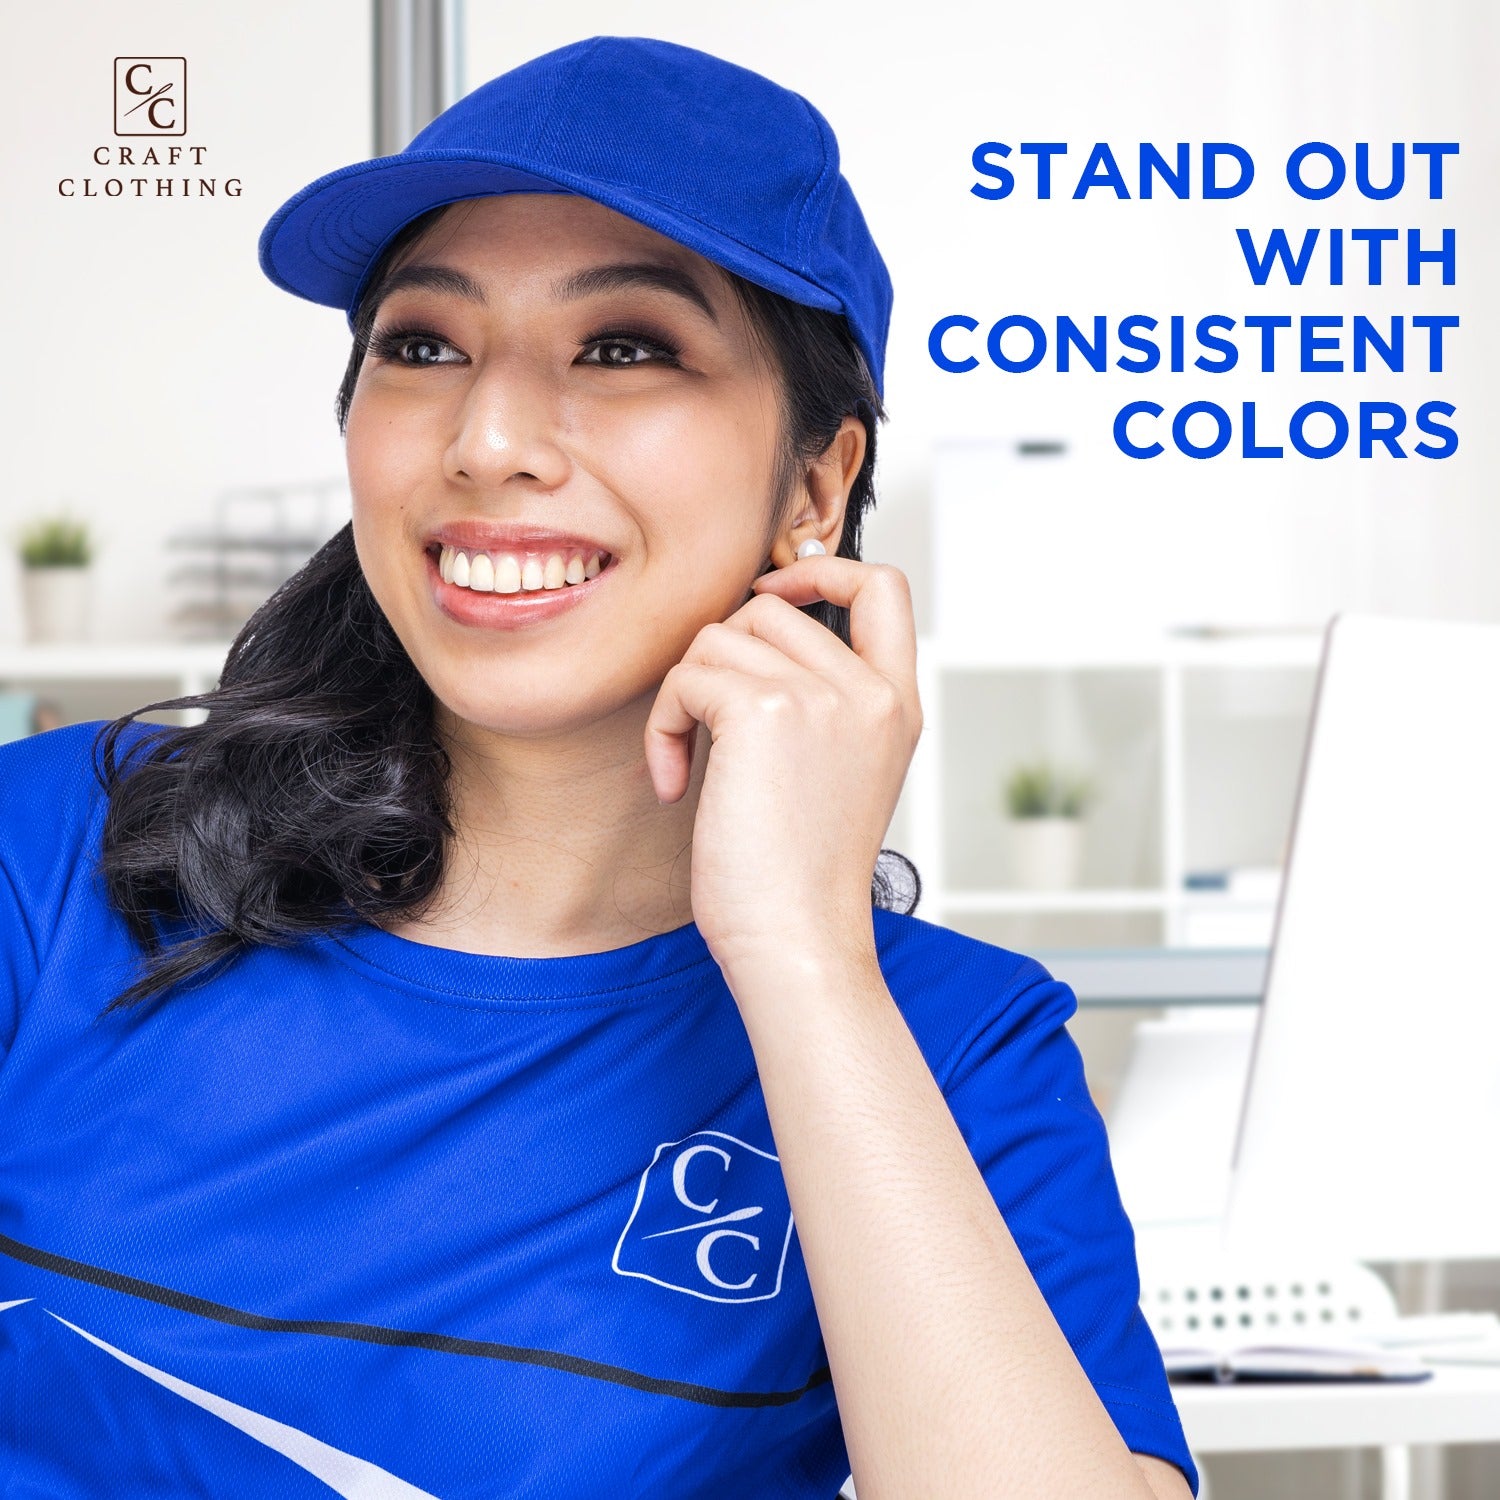 STAND OUT WITH CONSISTENT COLORS